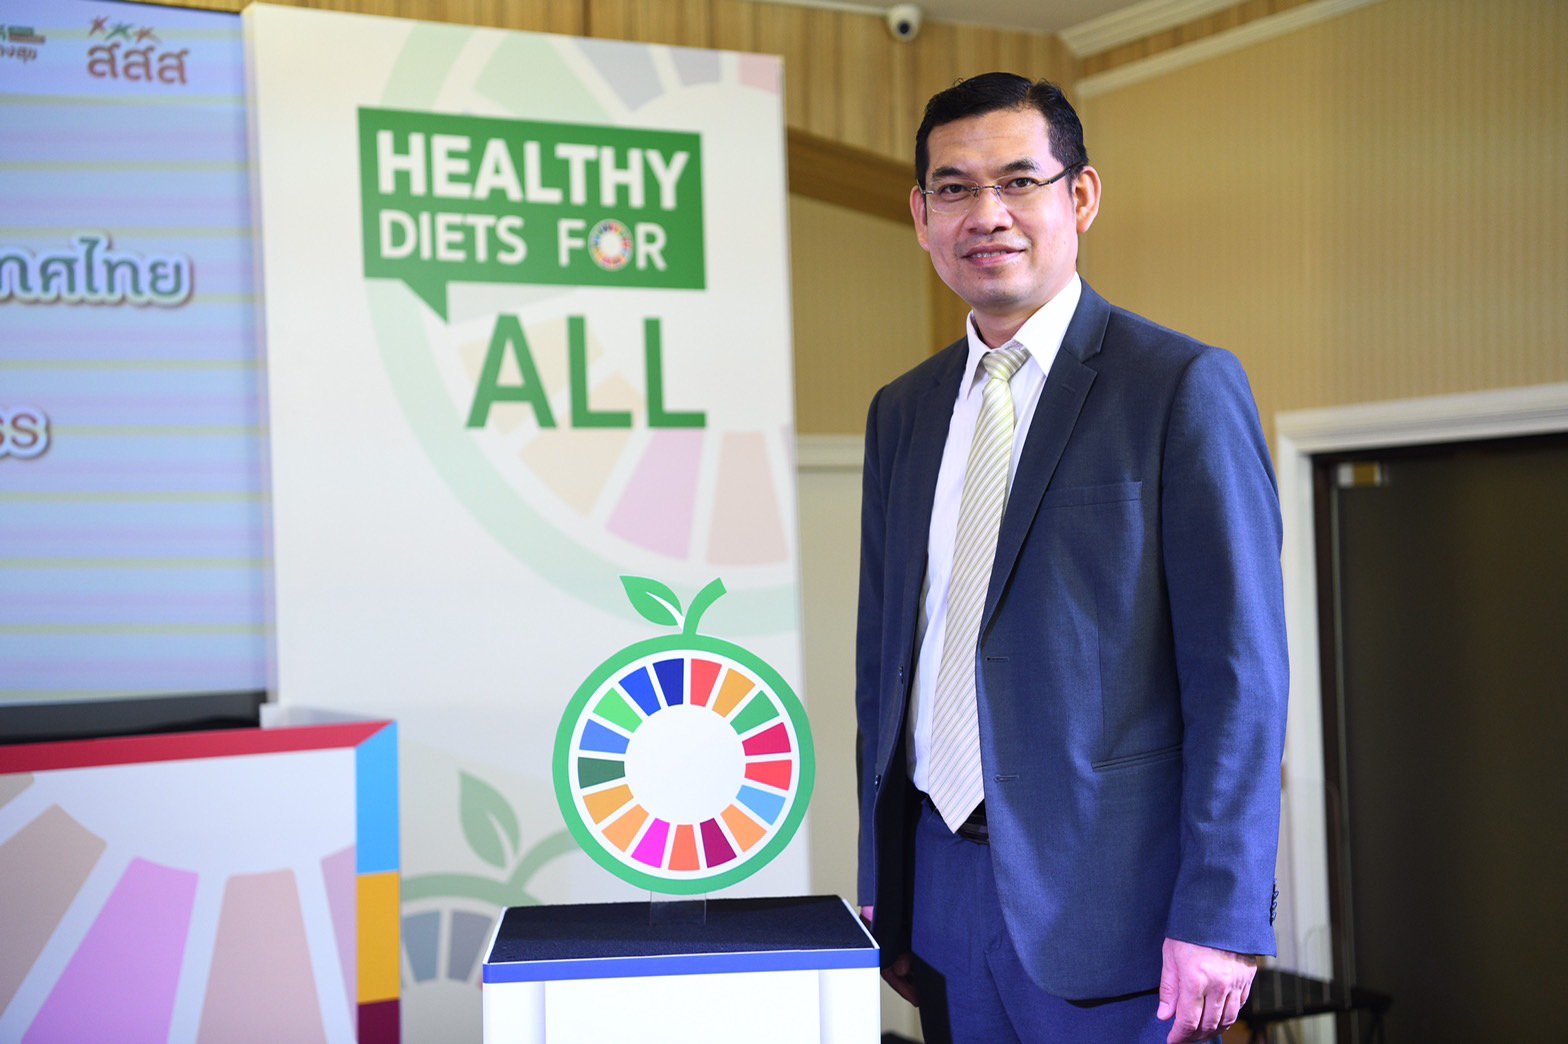 5 ways to reduce risk factors of NCDs to be published in healthy lifestyle manual thaihealth